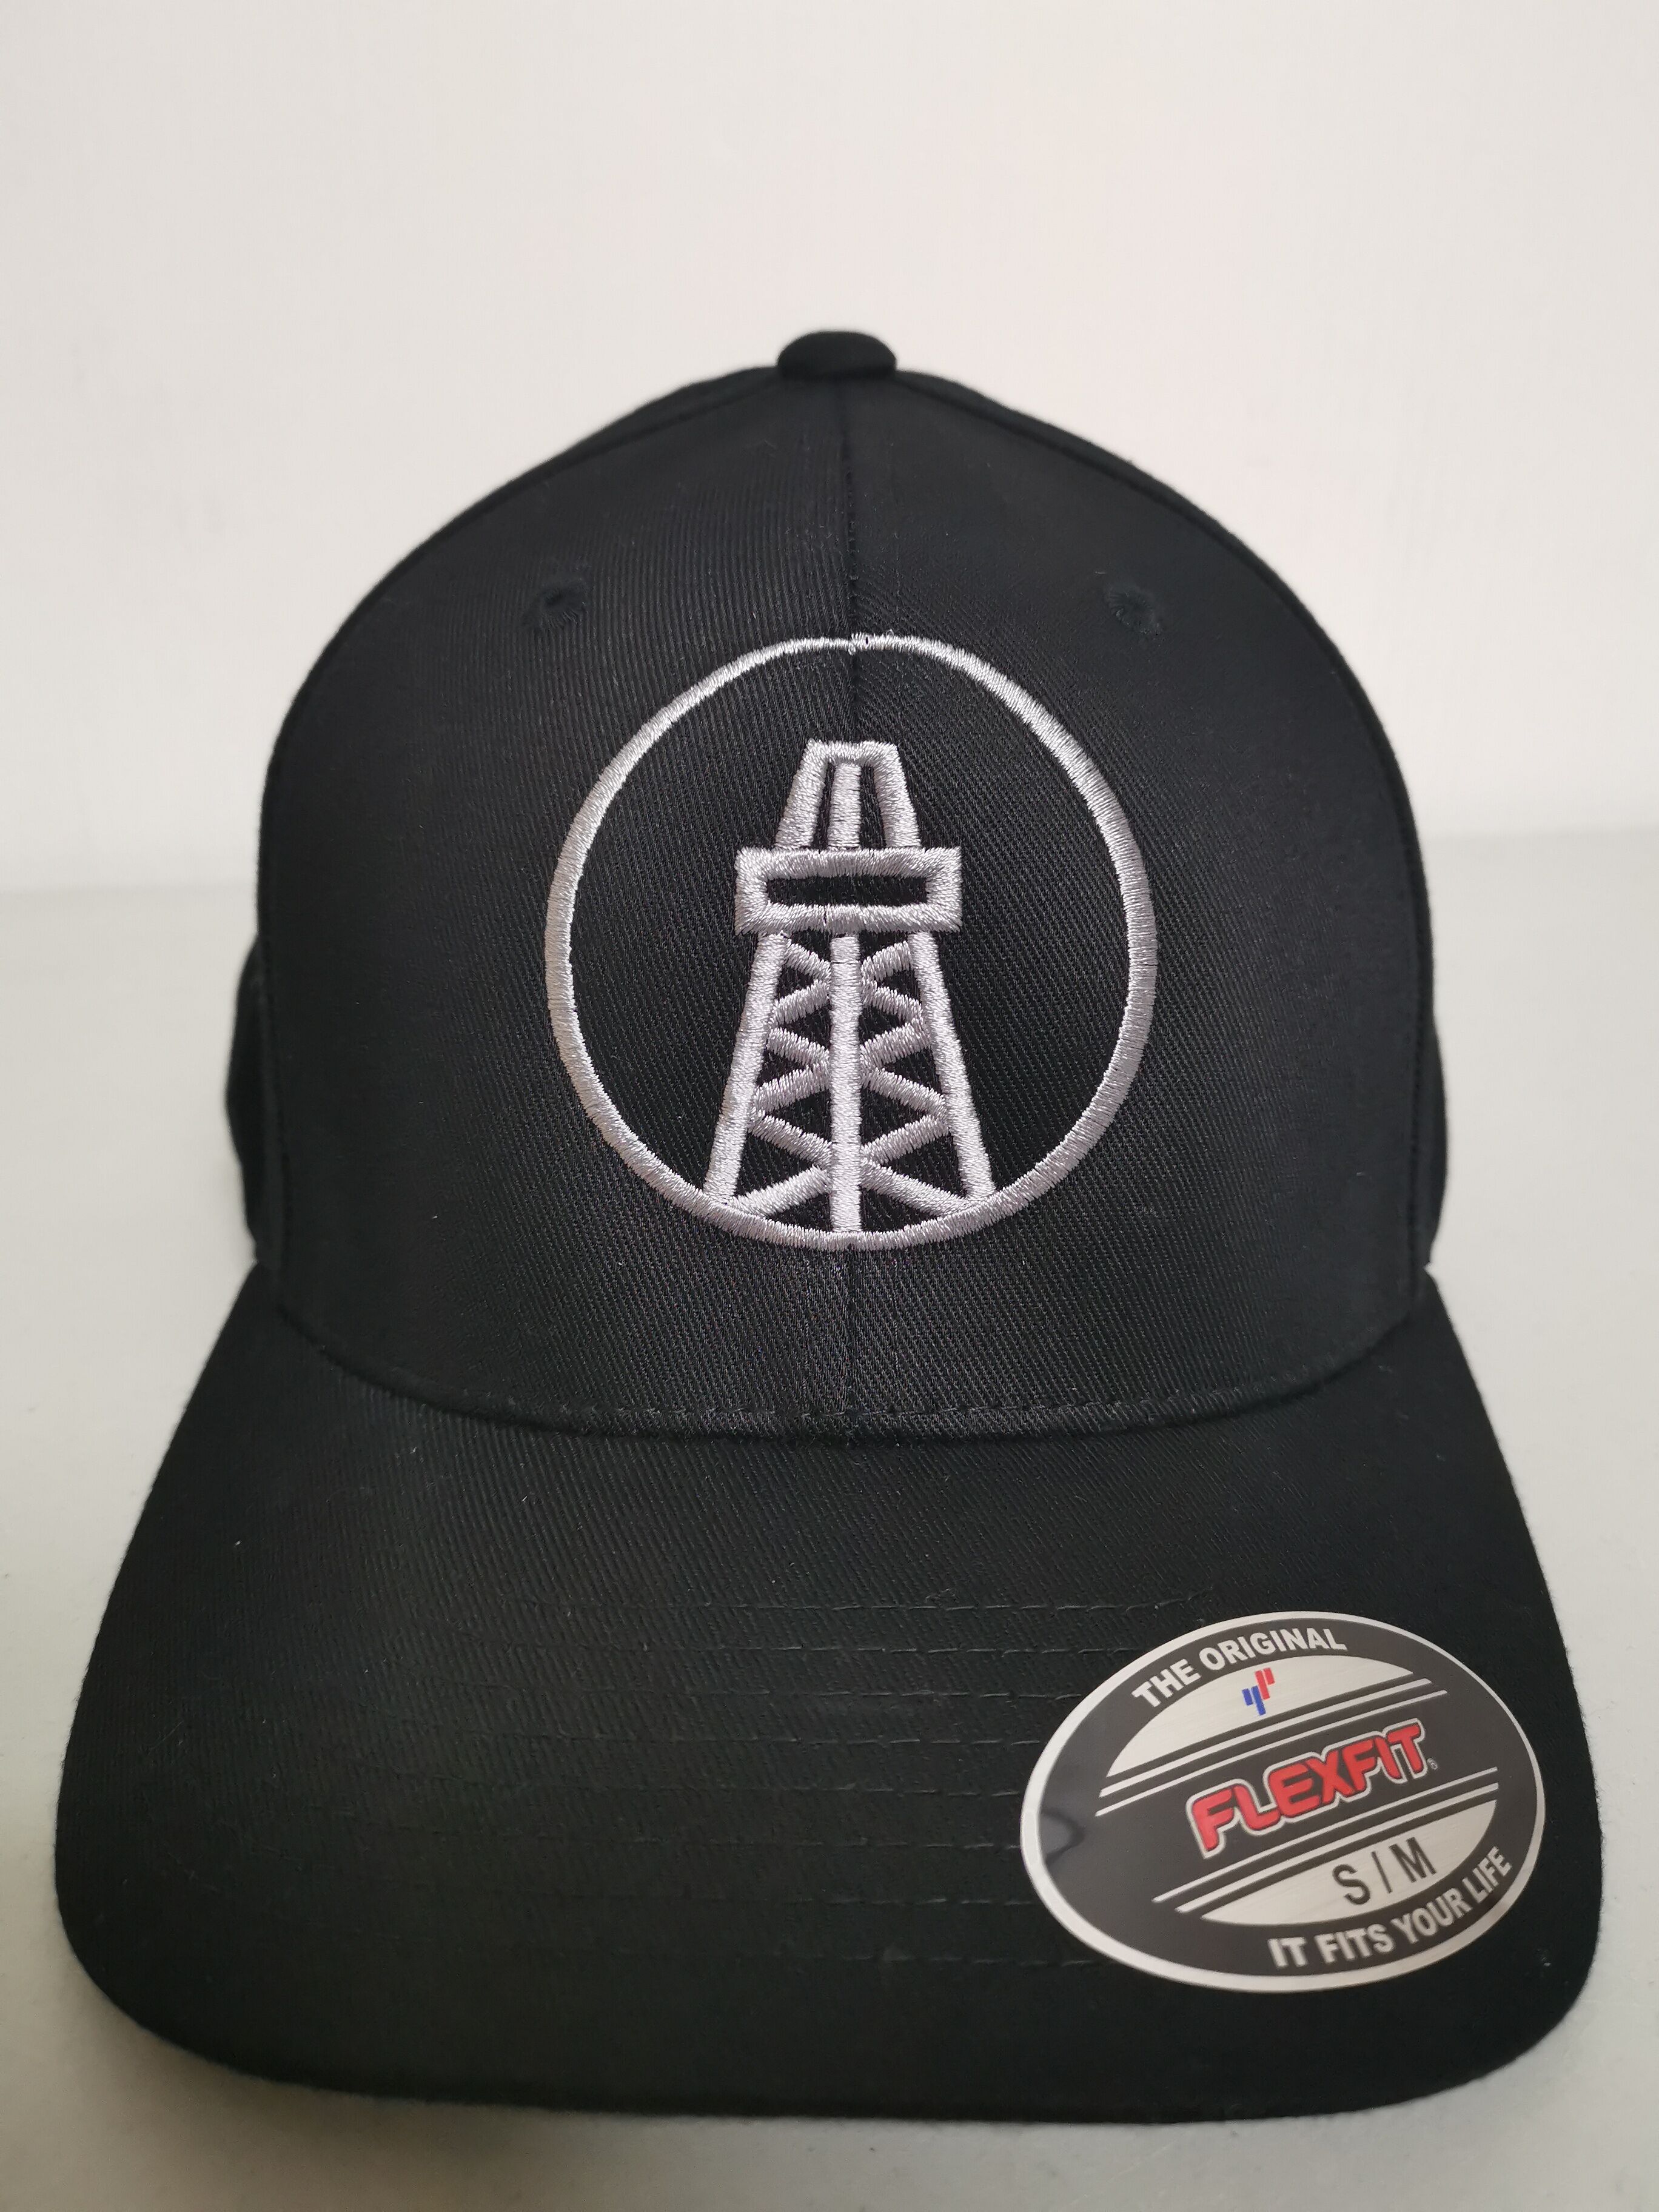 Custom Embroidery on a baseball cap done by Direct Workwear